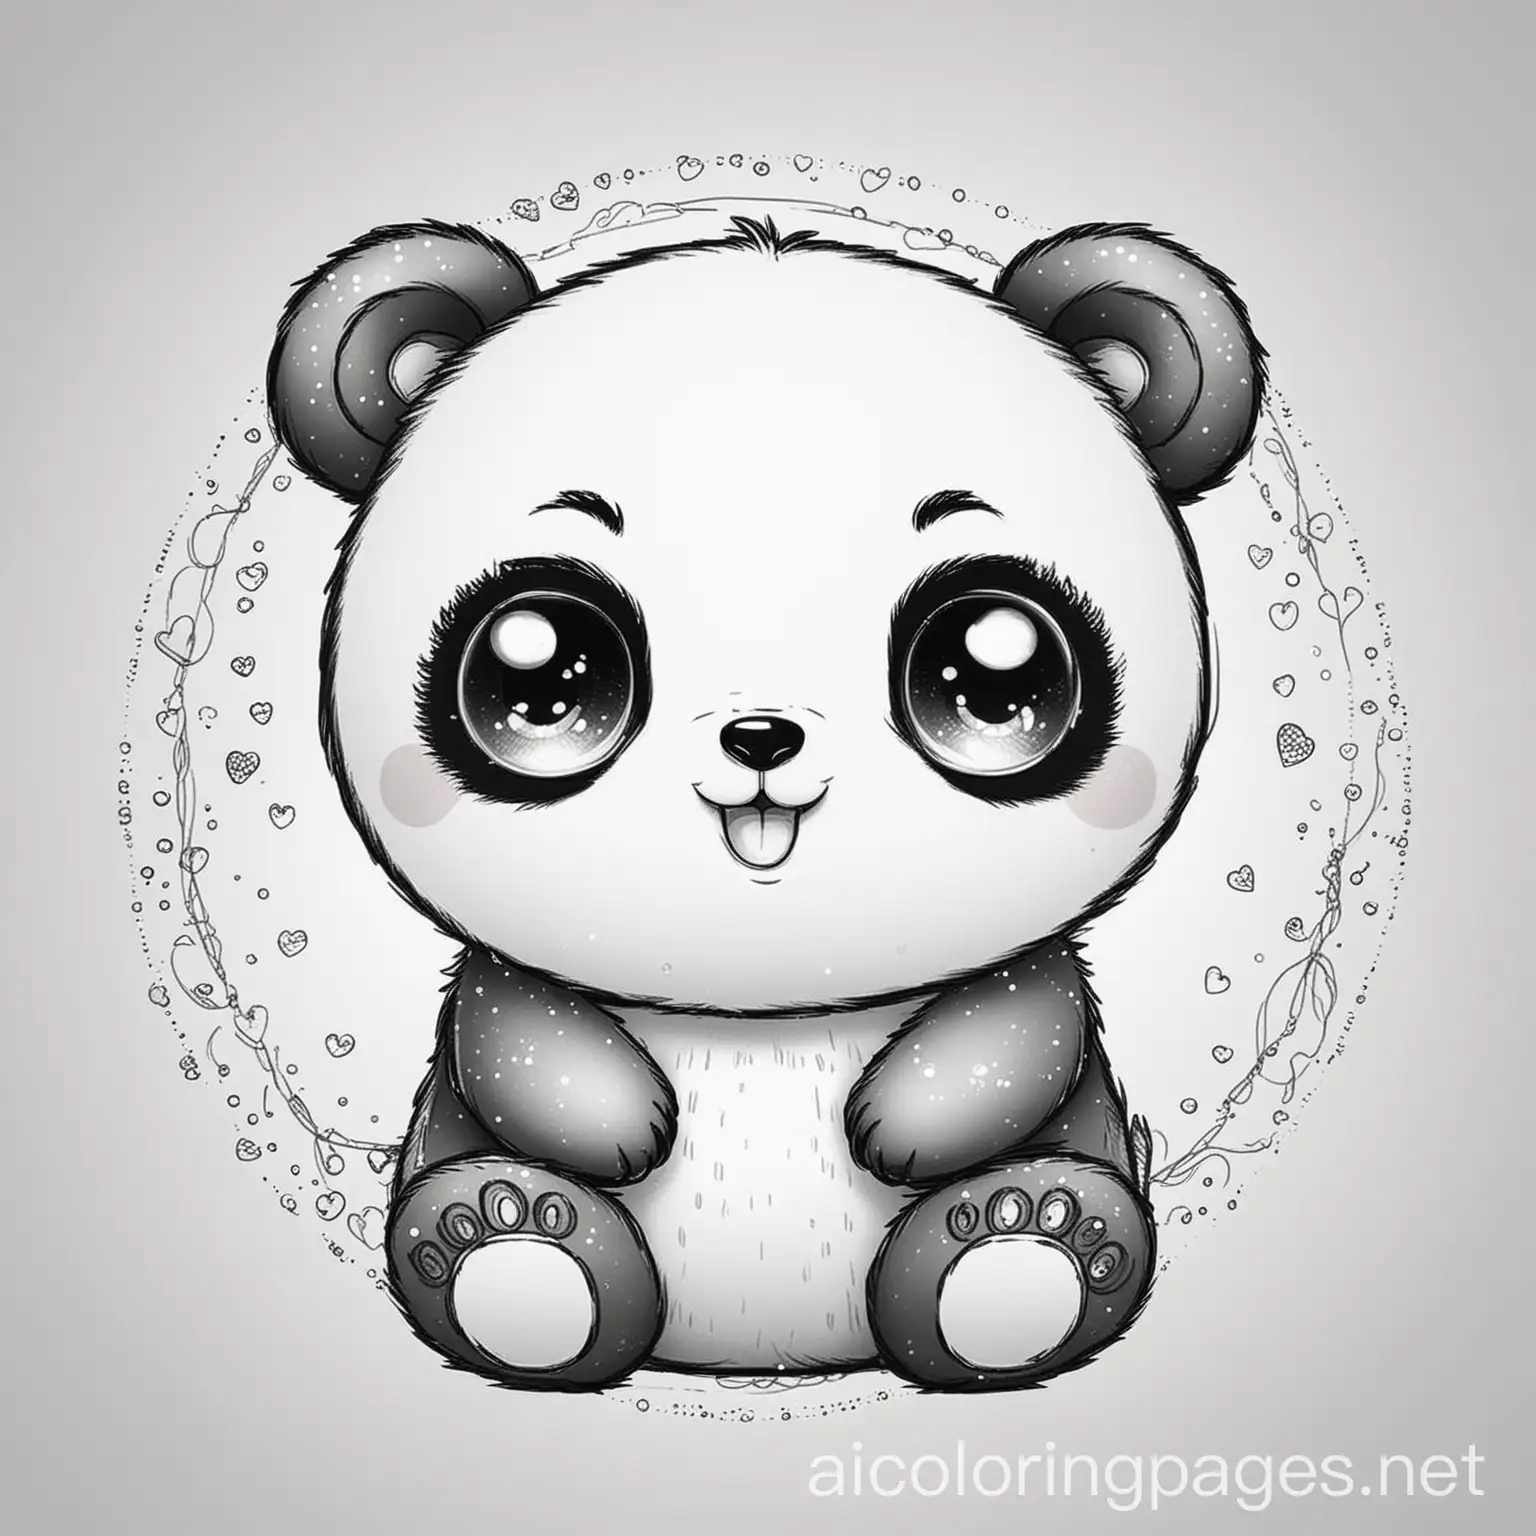 Adorable-Kawaii-Panda-Coloring-Page-Roundbodied-Panda-with-Sparkling-Eyes-and-a-Heart-on-Its-Tummy